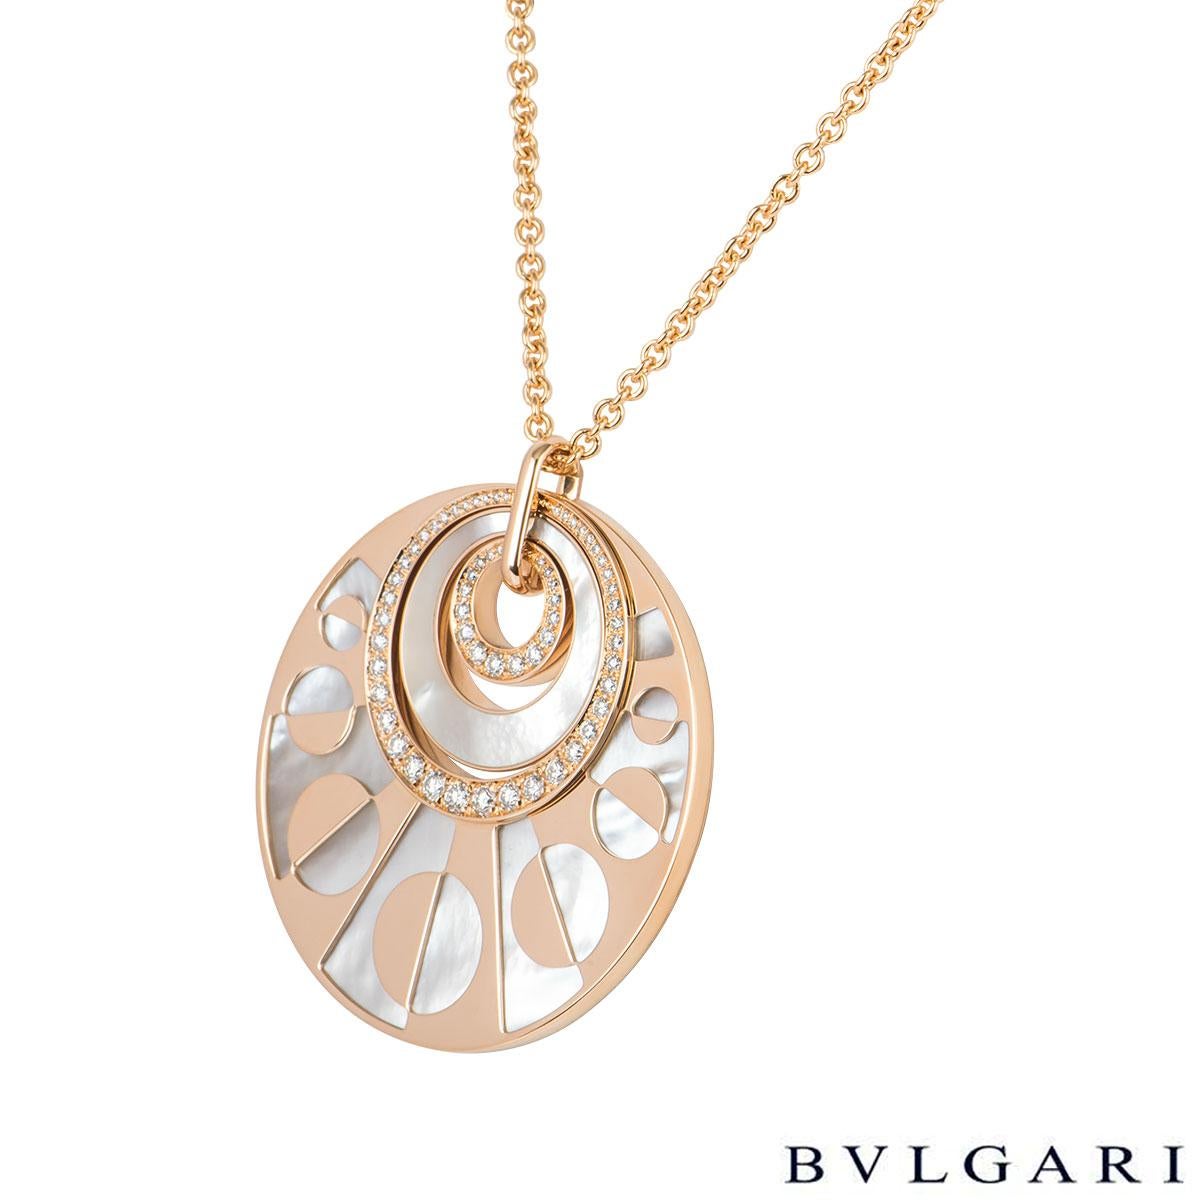 A stunning 18k rose gold diamond and pearl necklace by Bvlgari from the Intarsio collection. The necklace features 3 circular motifs within each other set with a mother of pearl inlay and round brilliant cut diamonds in a pave setting with a total